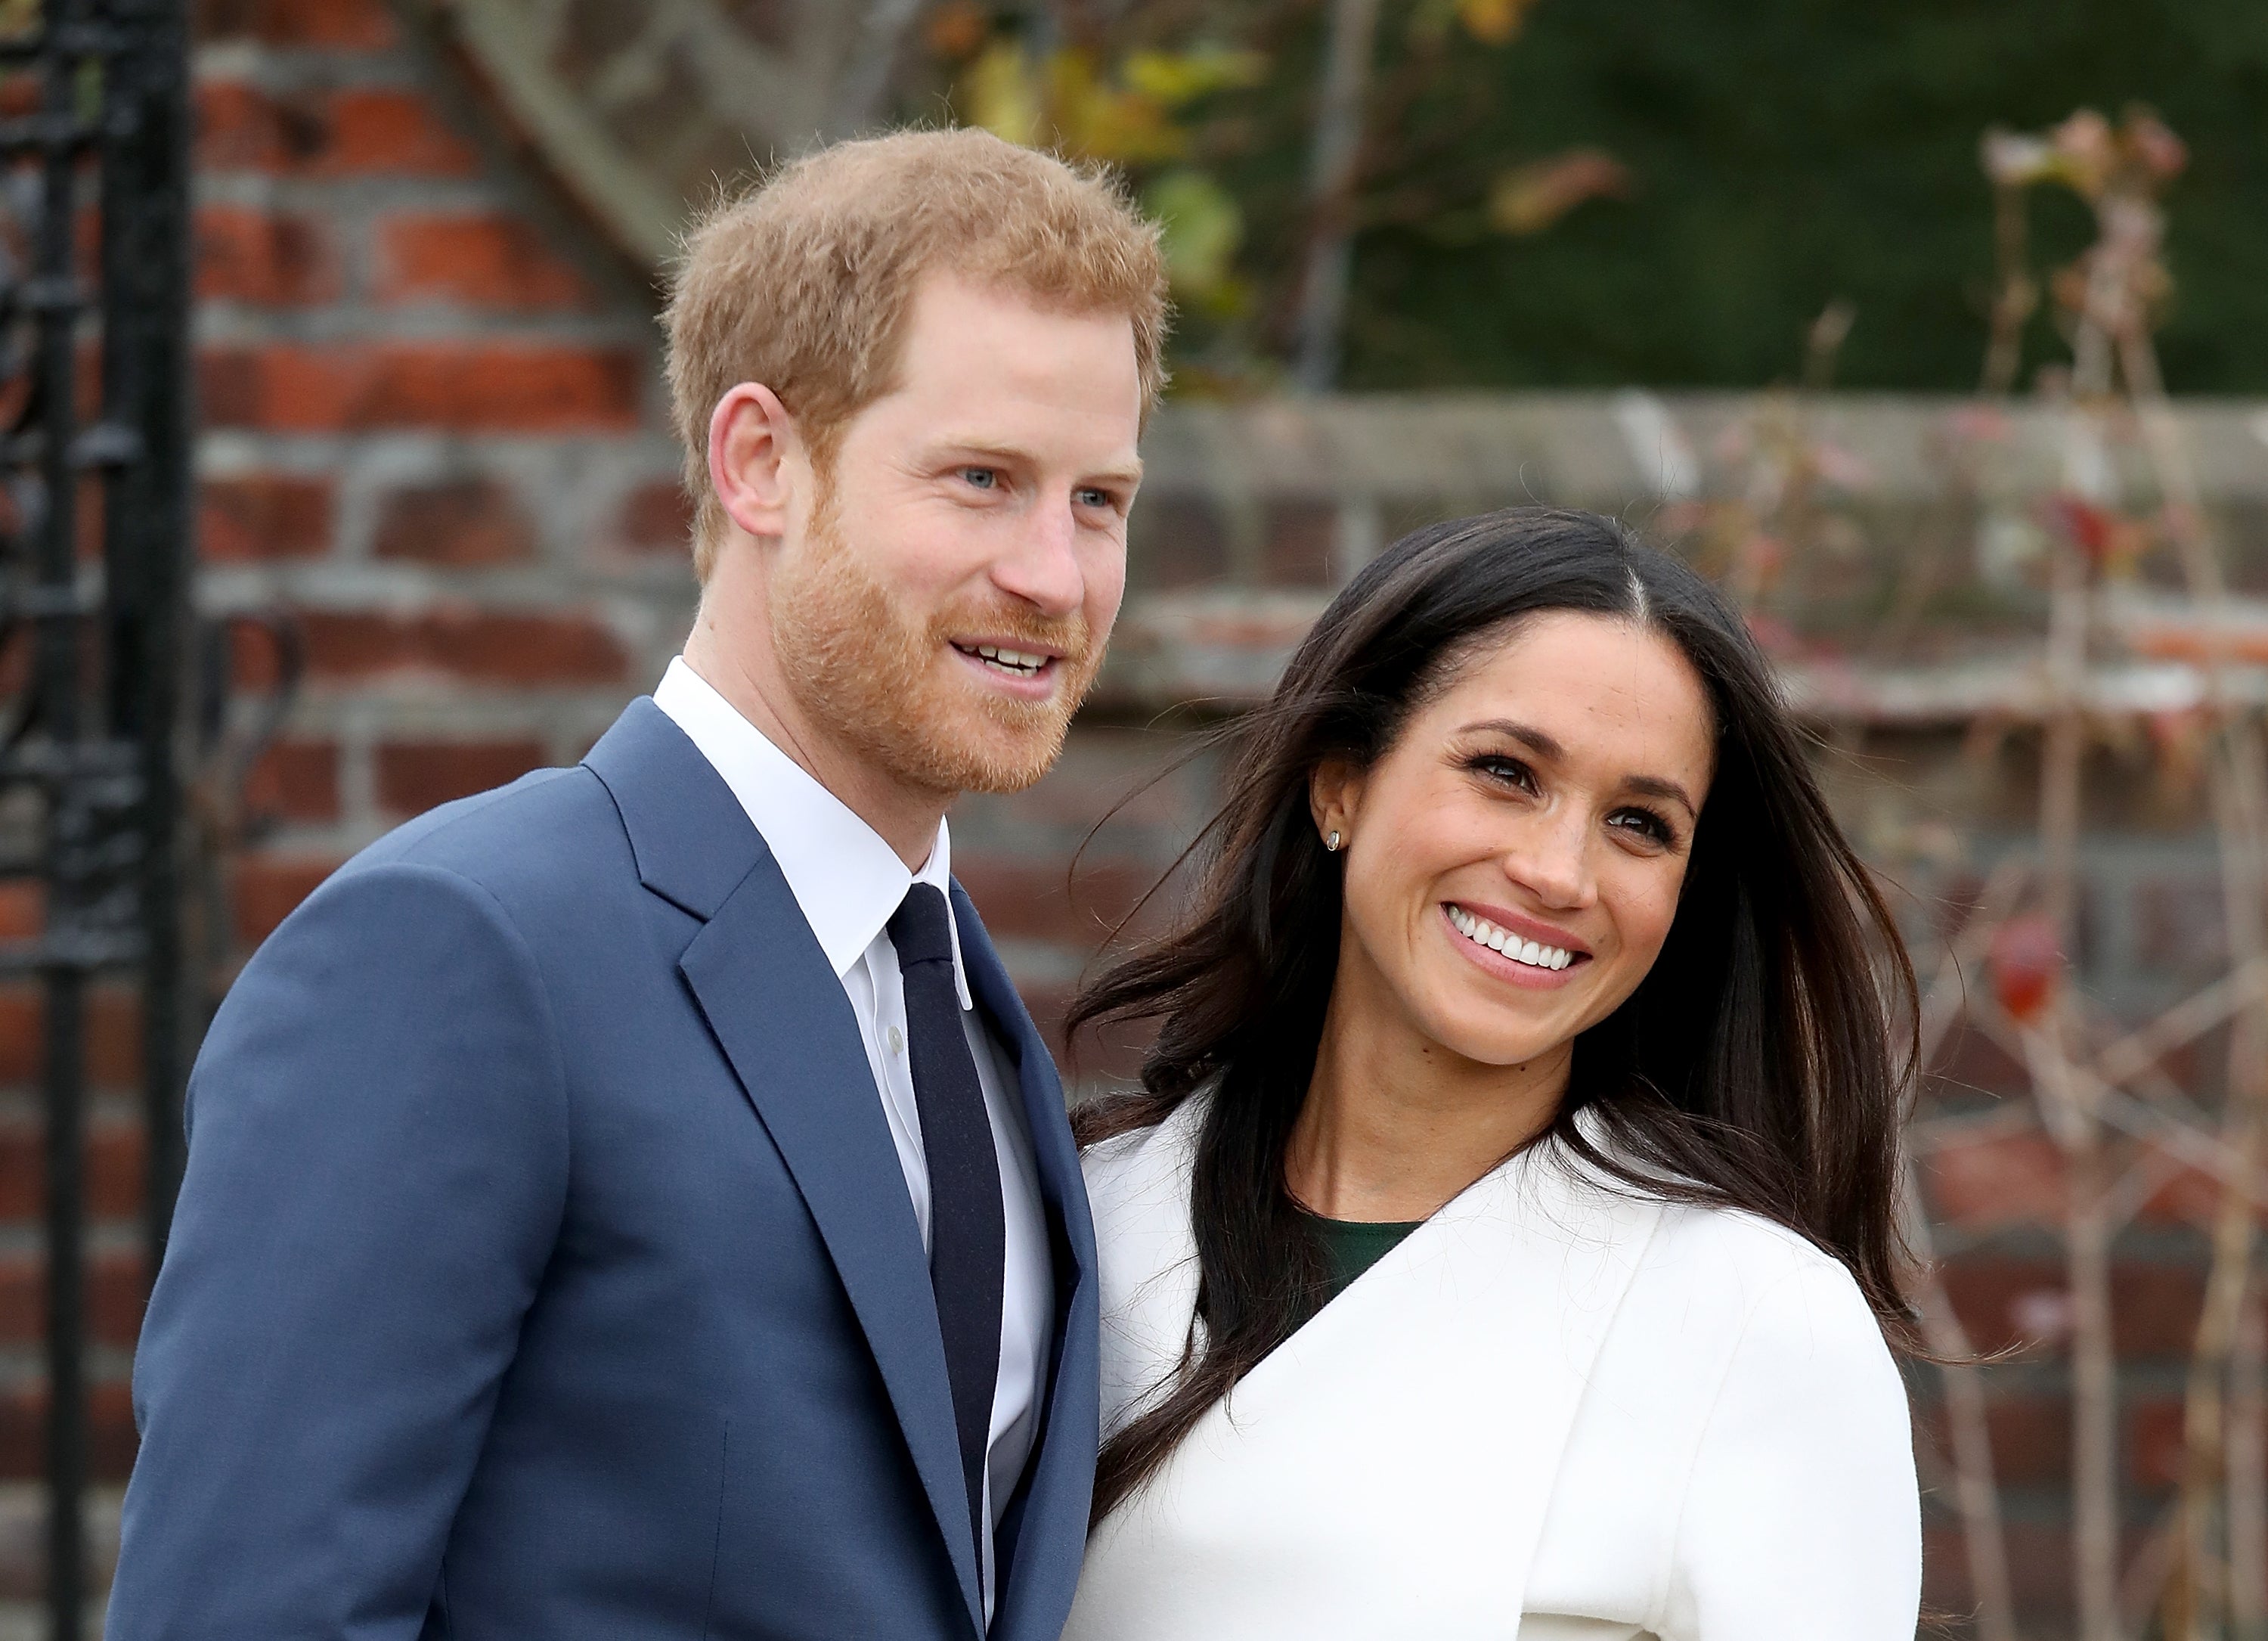 Relationship Expert Tracy McMillan Weighs In On Prince Harry And Meghan Markle’s Royal Exit